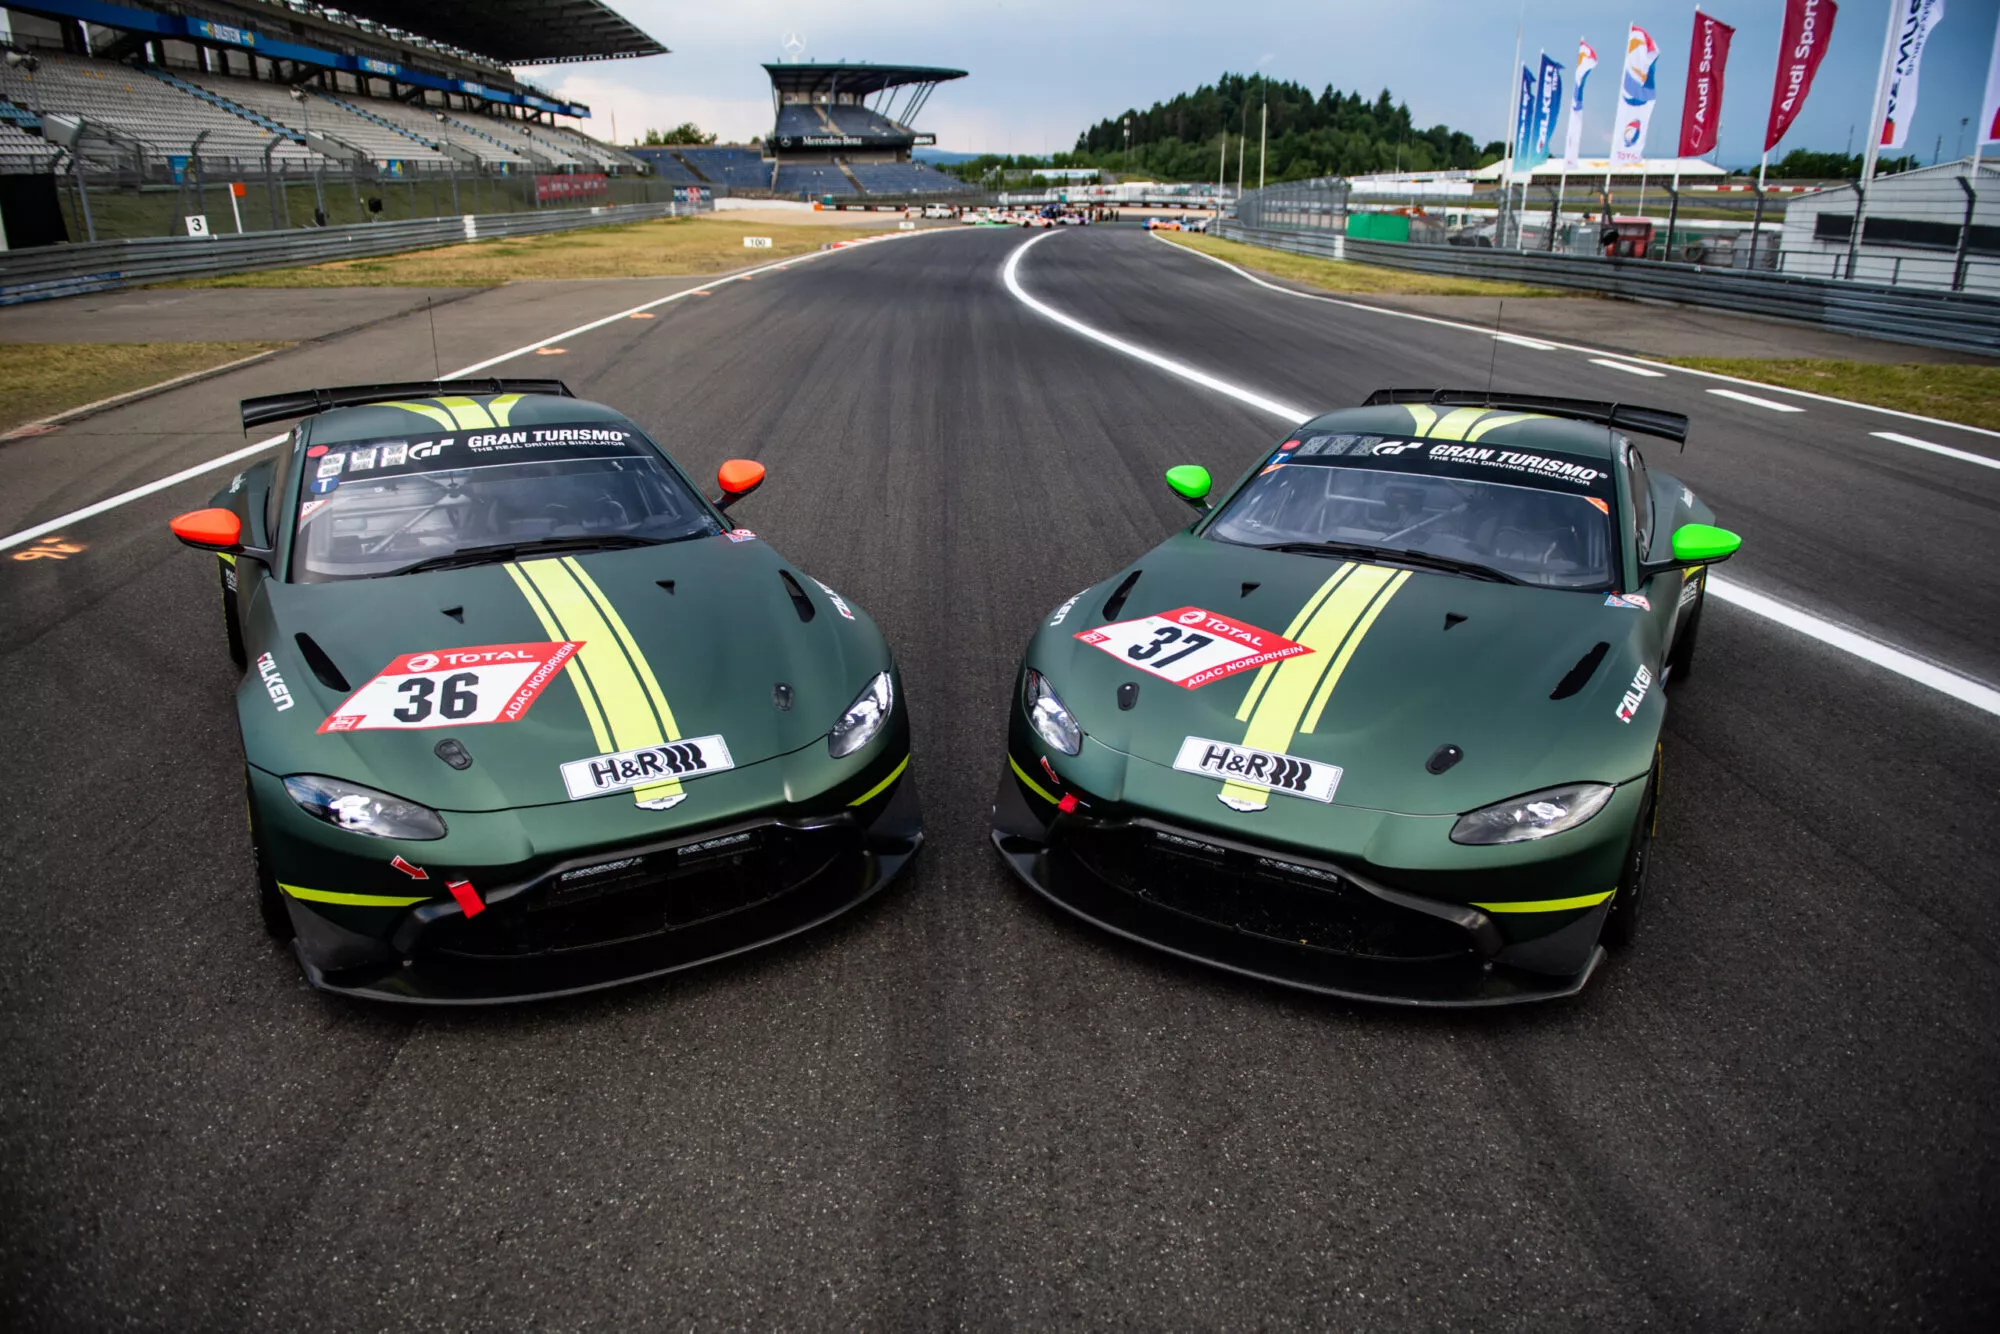 PROsport Racing returns to GT4 European Series with double Aston